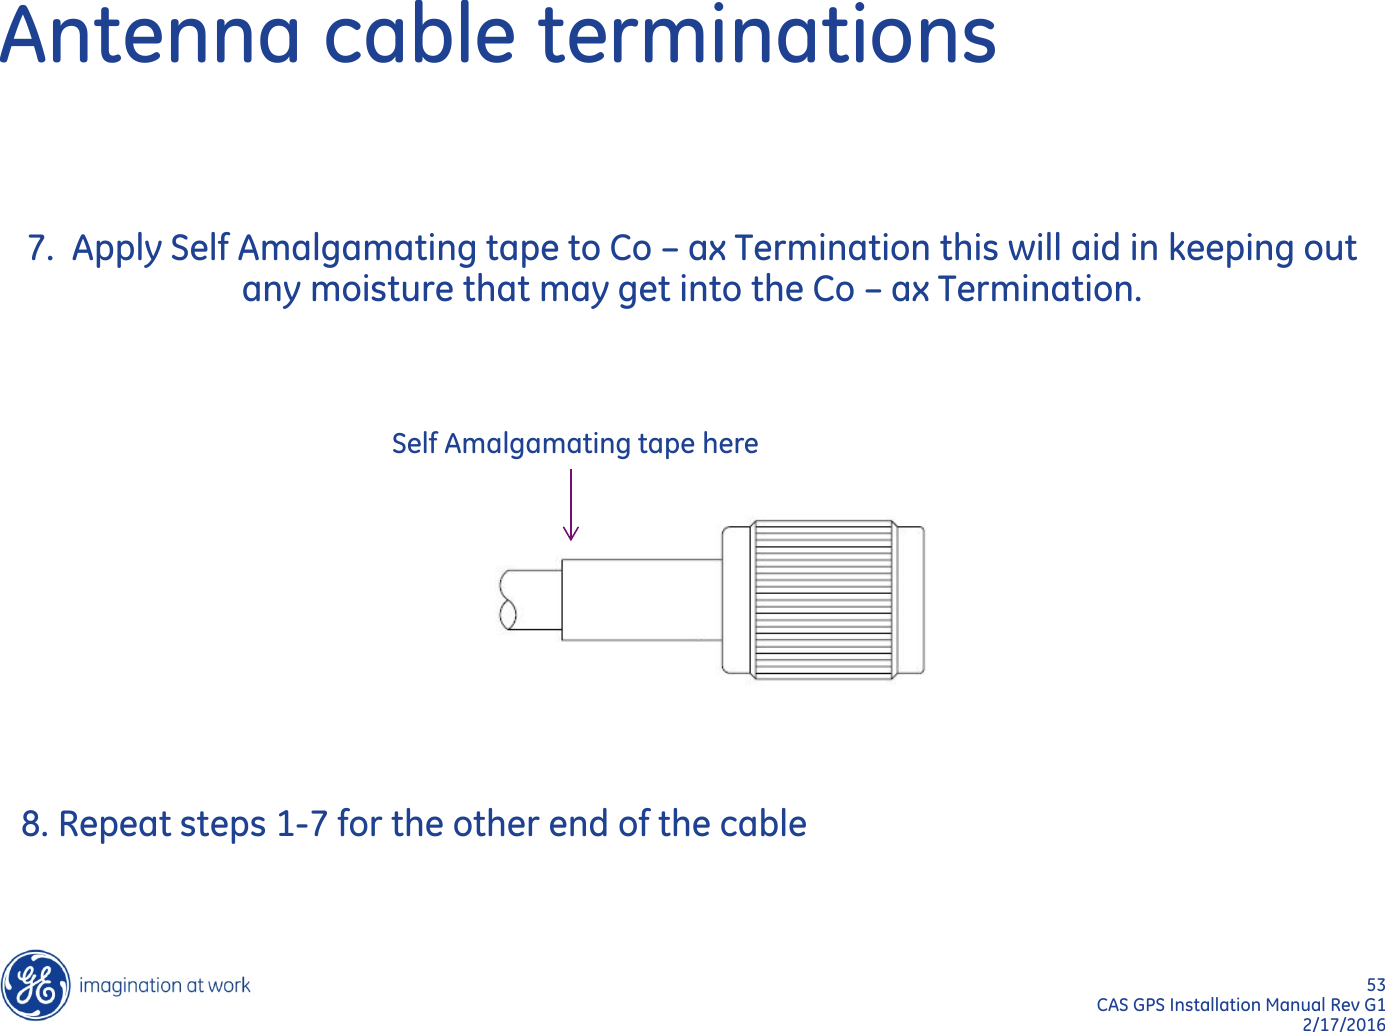 53  CAS GPS Installation Manual Rev G1 2/17/2016 Antenna cable terminations 7.  Apply Self Amalgamating tape to Co – ax Termination this will aid in keeping out   any moisture that may get into the Co – ax Termination. Self Amalgamating tape here 8. Repeat steps 1-7 for the other end of the cable 